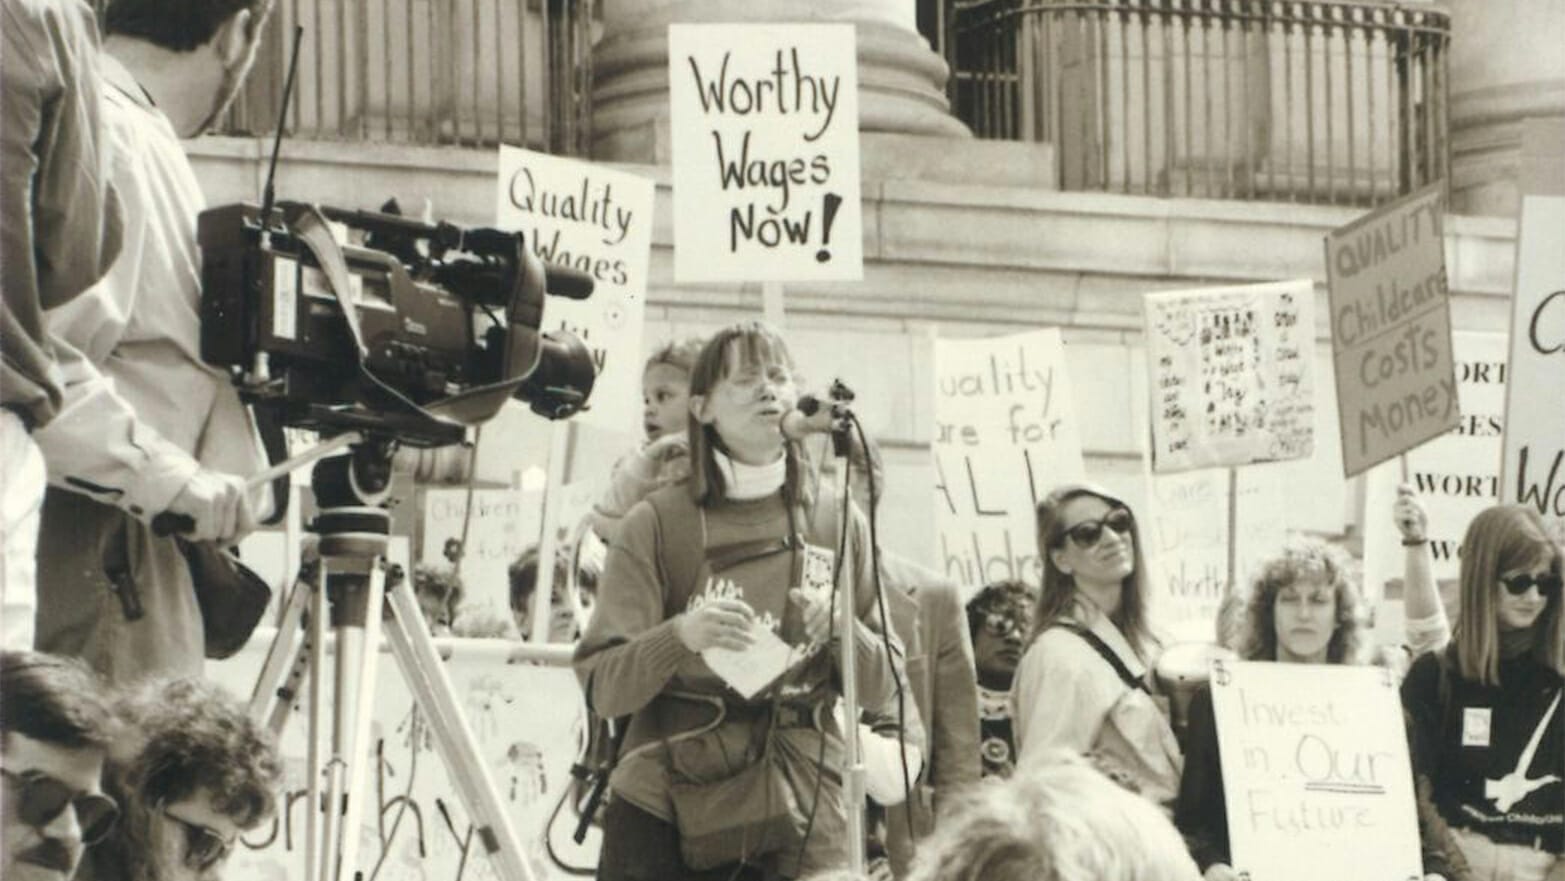 a rally advocating for worthy wages now in the early 1990s